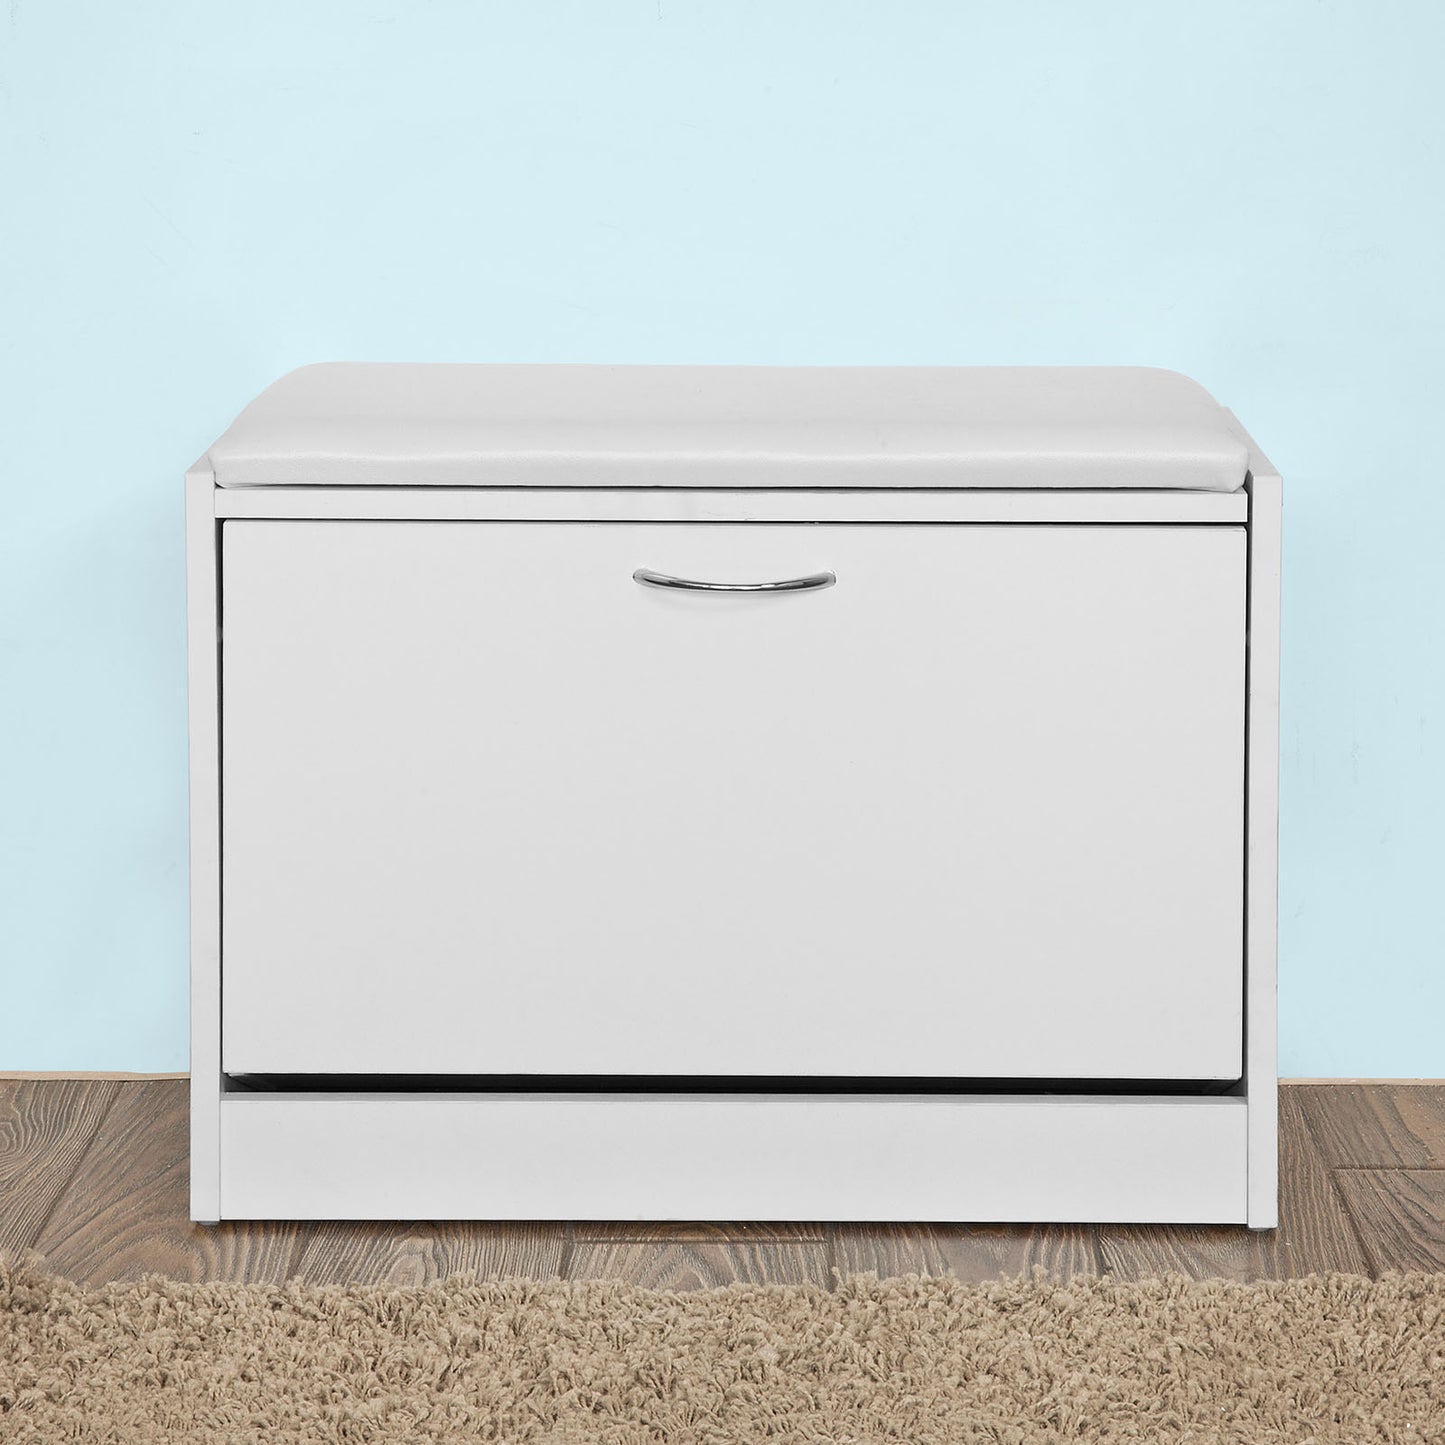 SoBuy White Shoe Storage Bench With Flip-Drawer, Shoe Cabinet With Seat Cushion